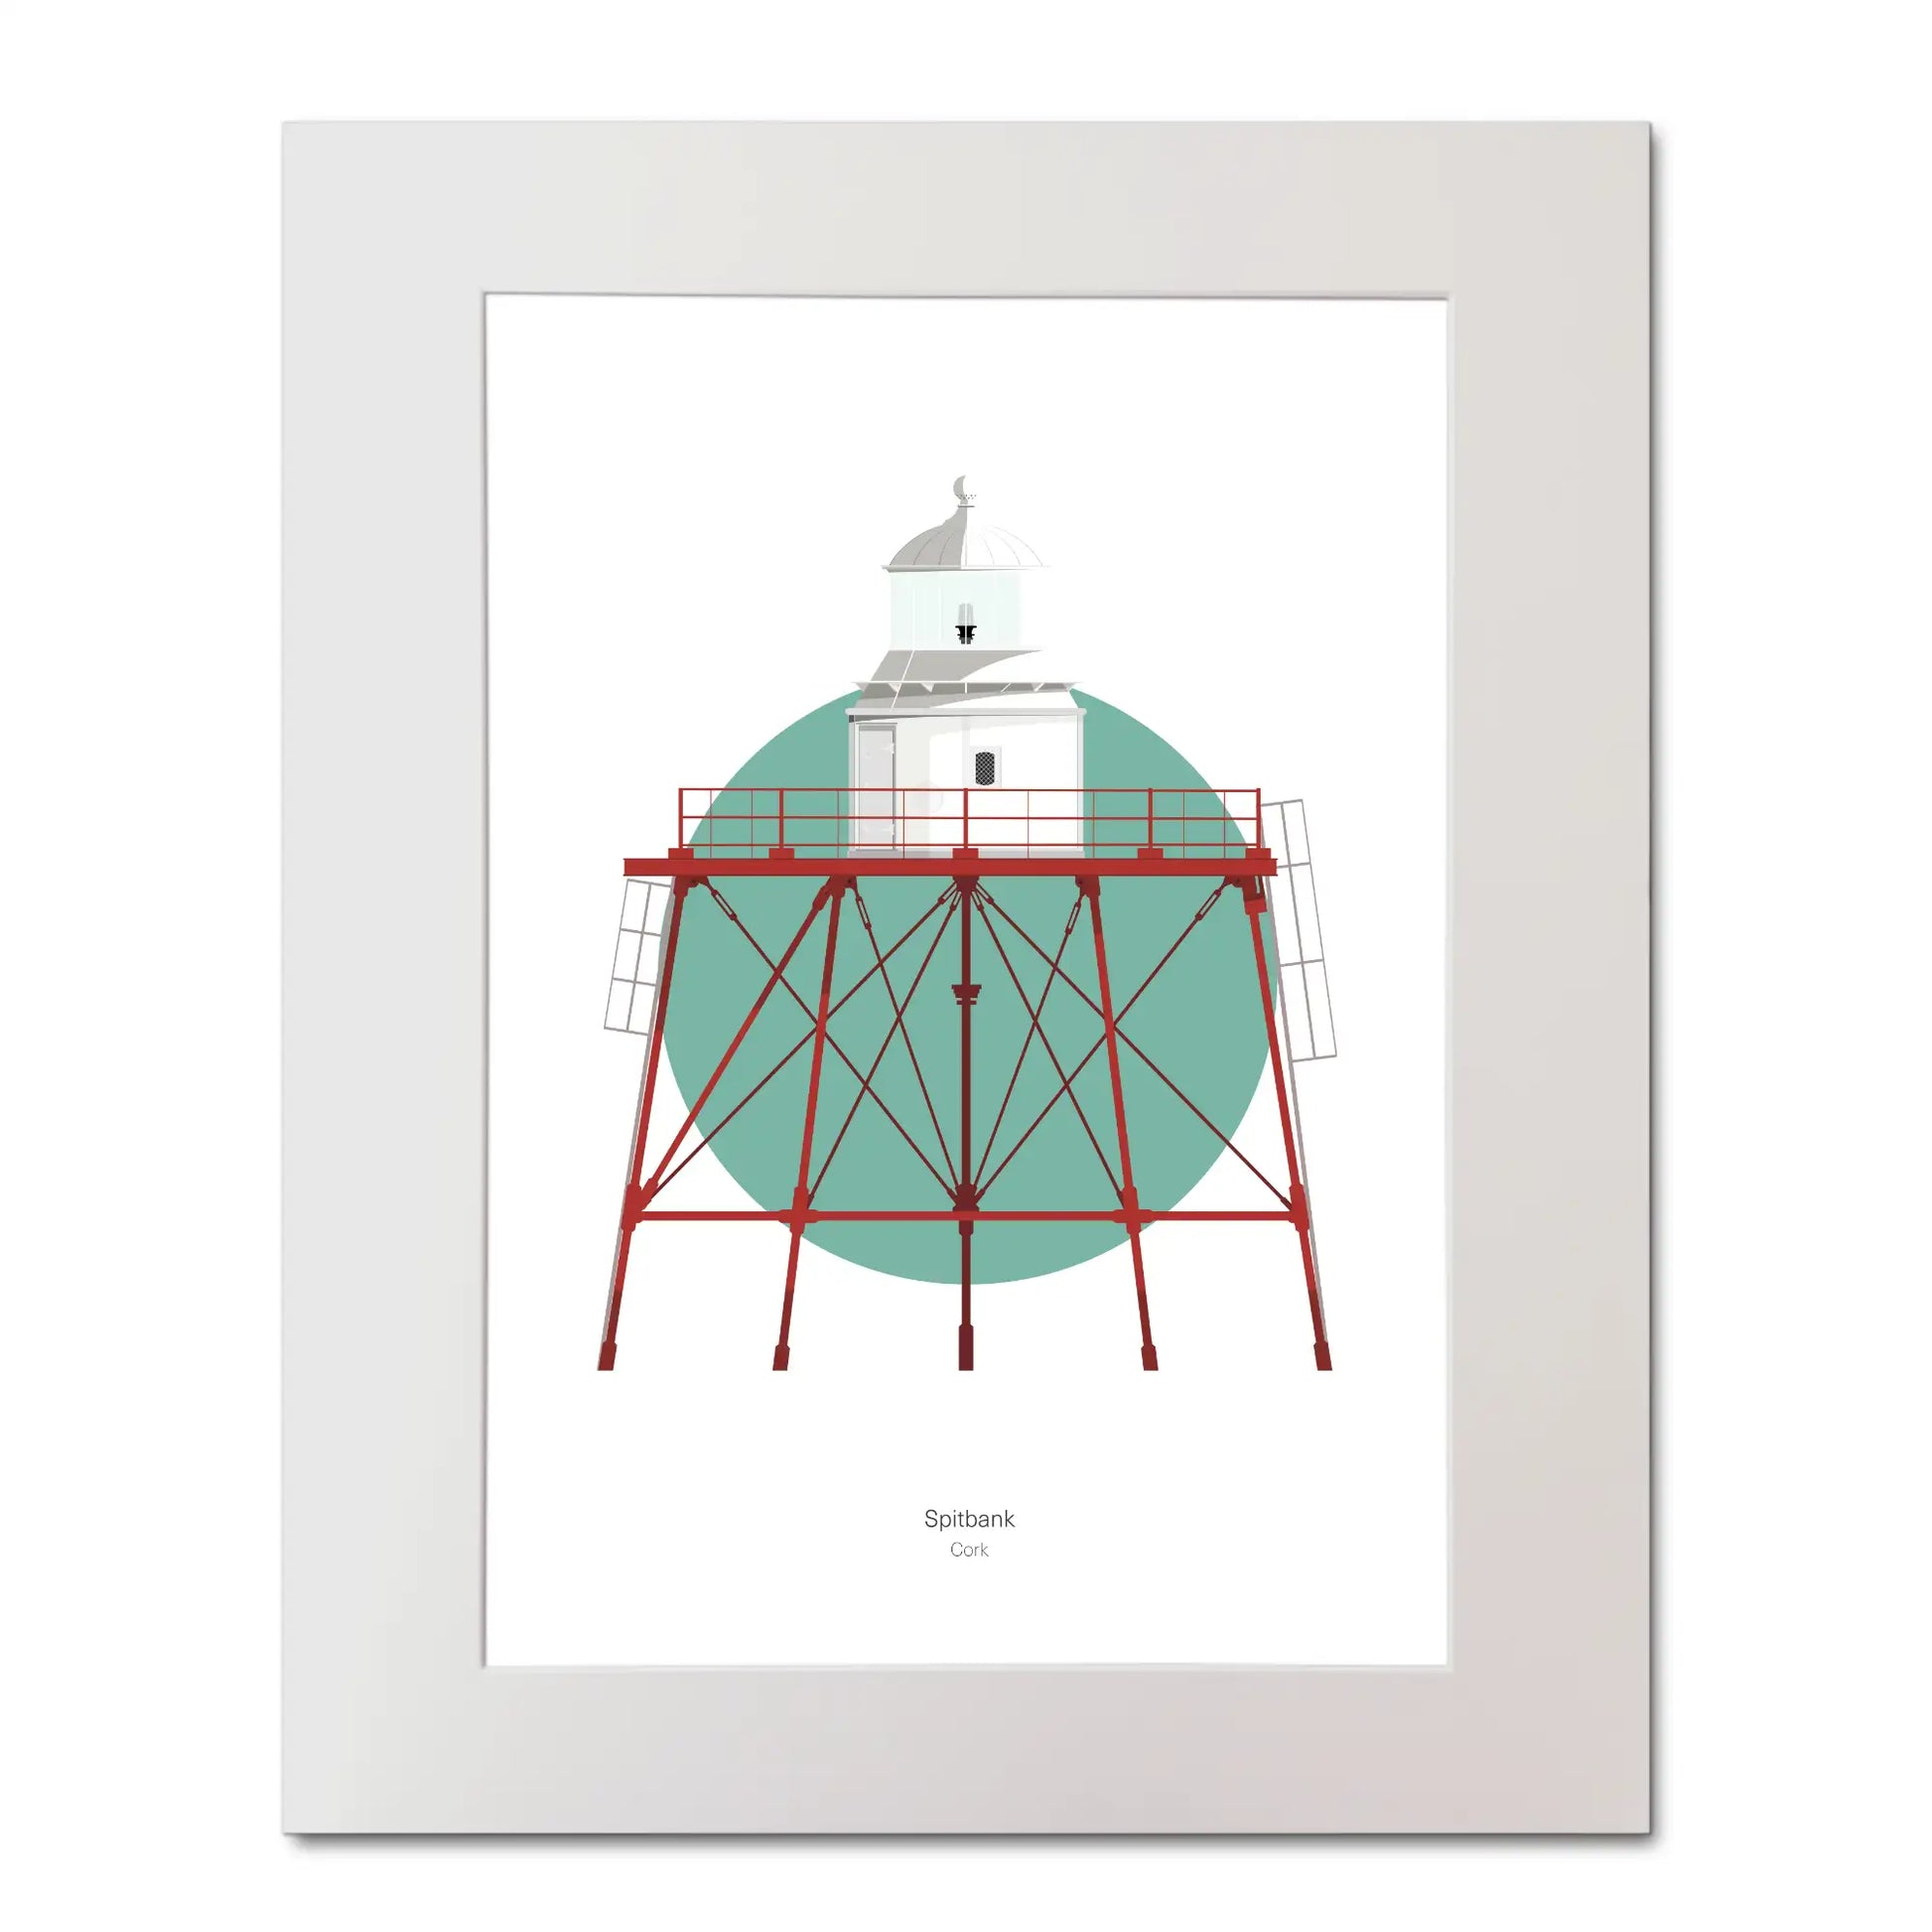 Illustration of Spitbank lighthouse on a white background inside light blue square, mounted and measuring 40x50cm.